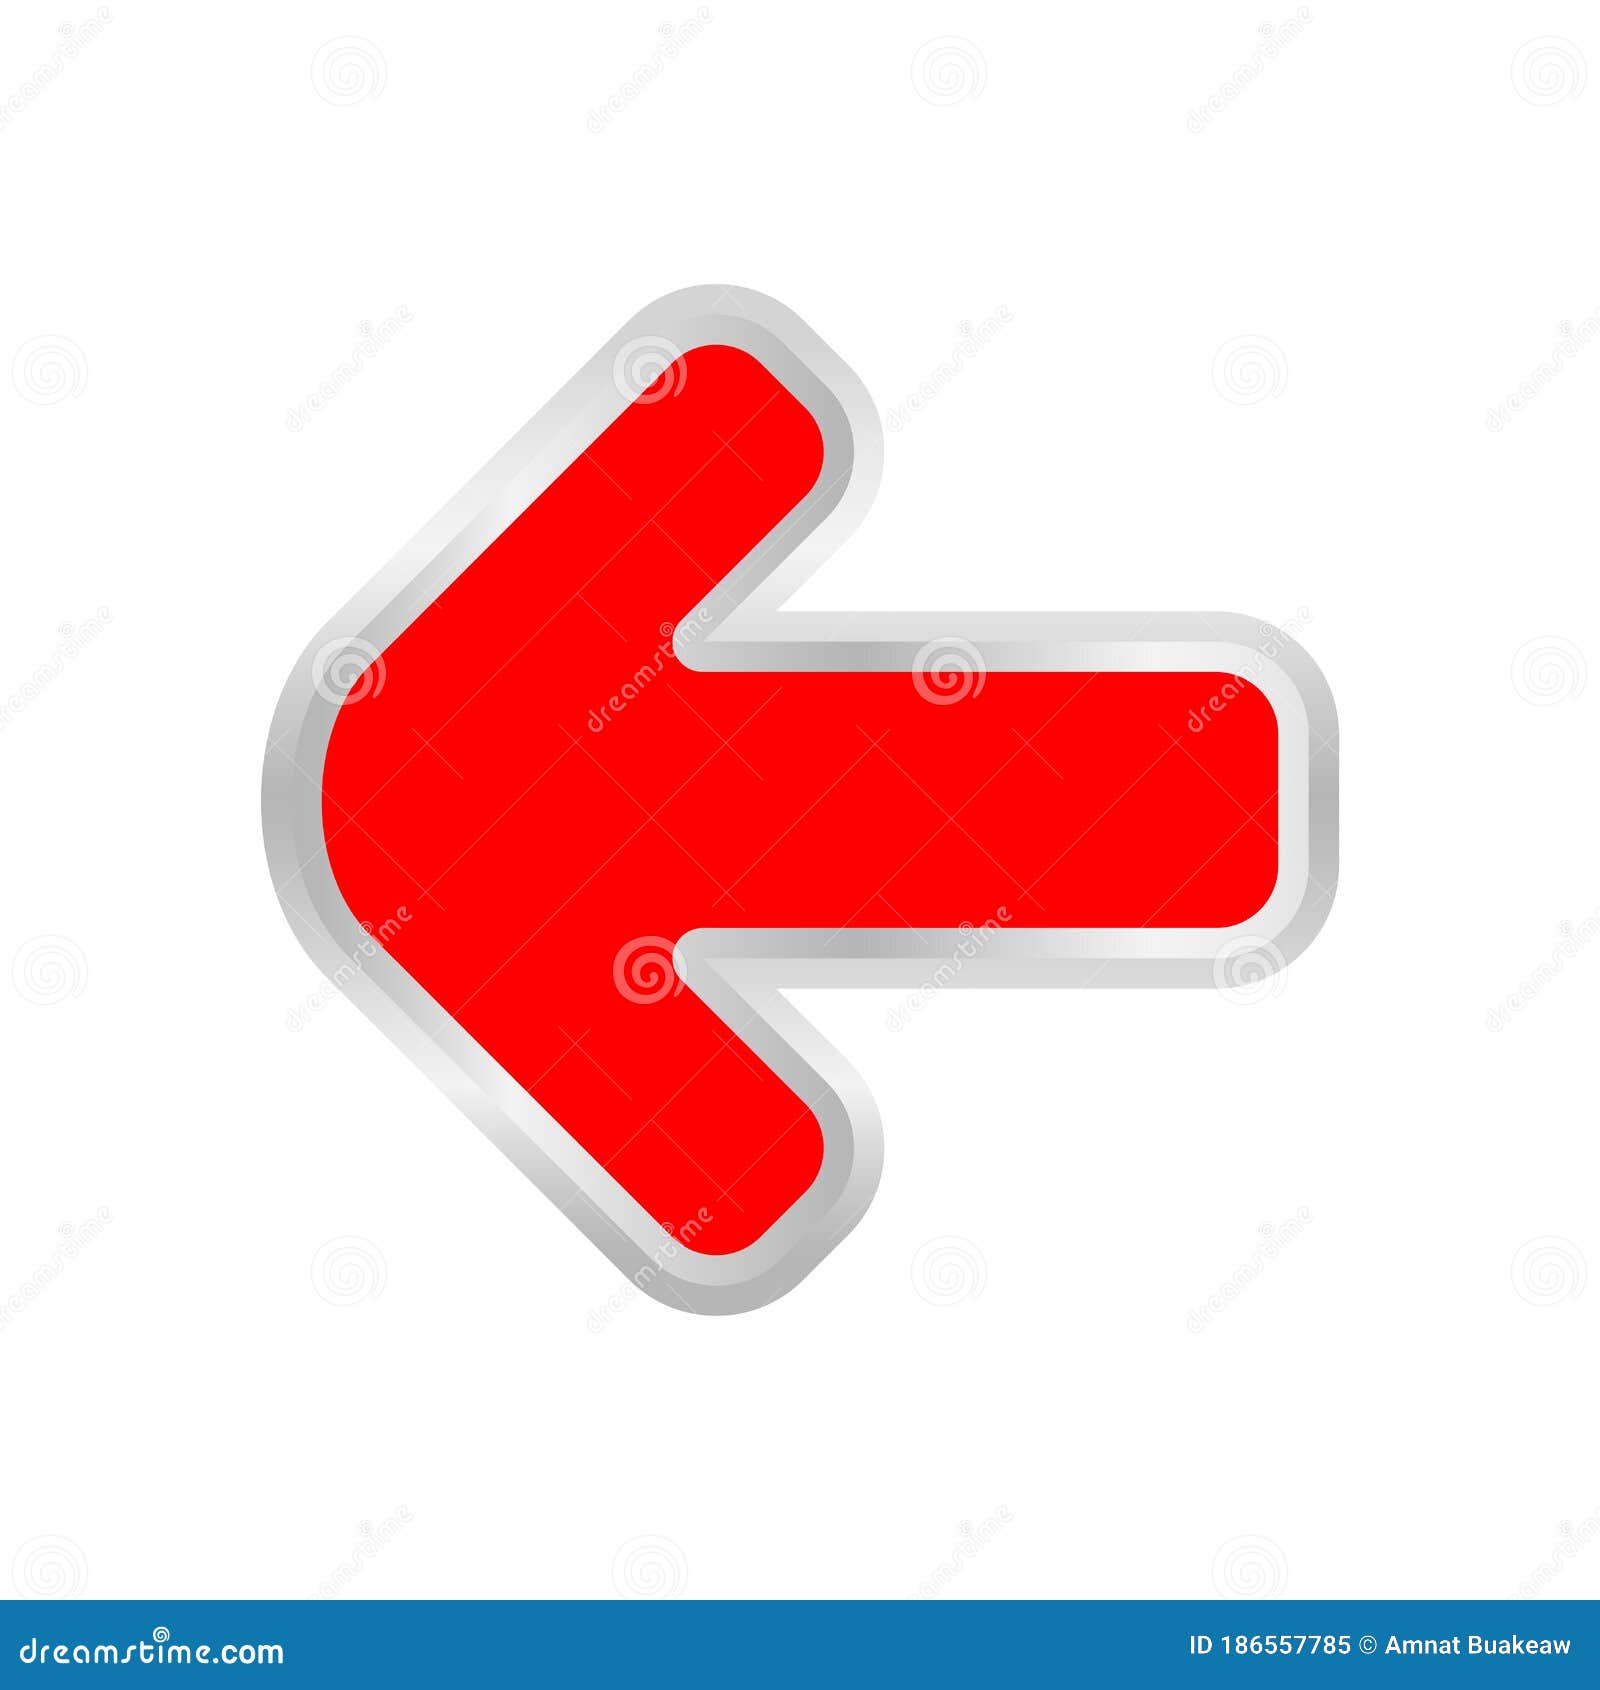 Red Arrow Pointing Left Isolated on White, Clip Art Red Arrow Icon